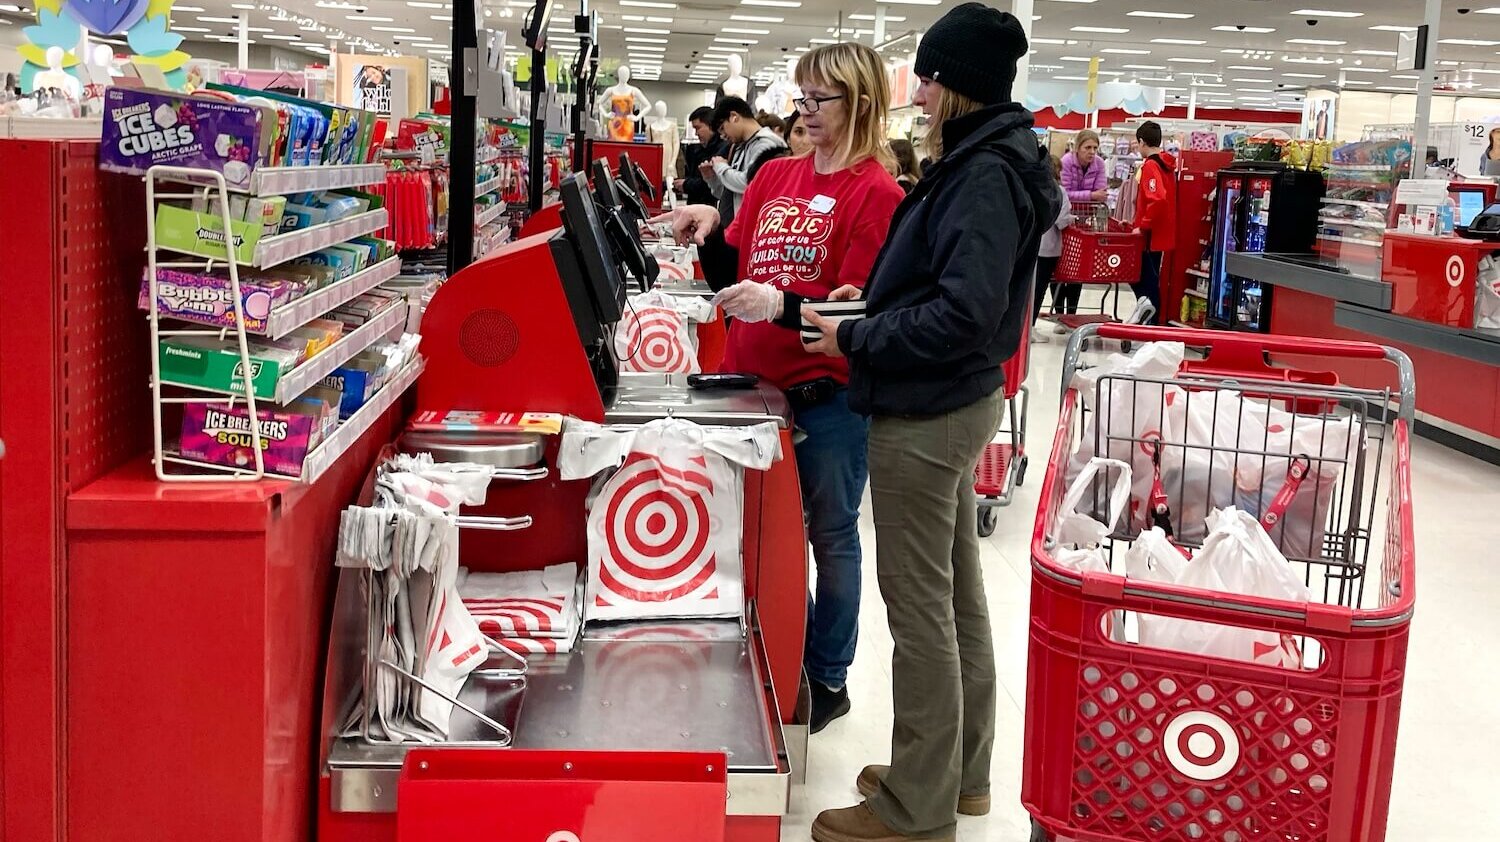 Worker helps customer at Target self-checkout